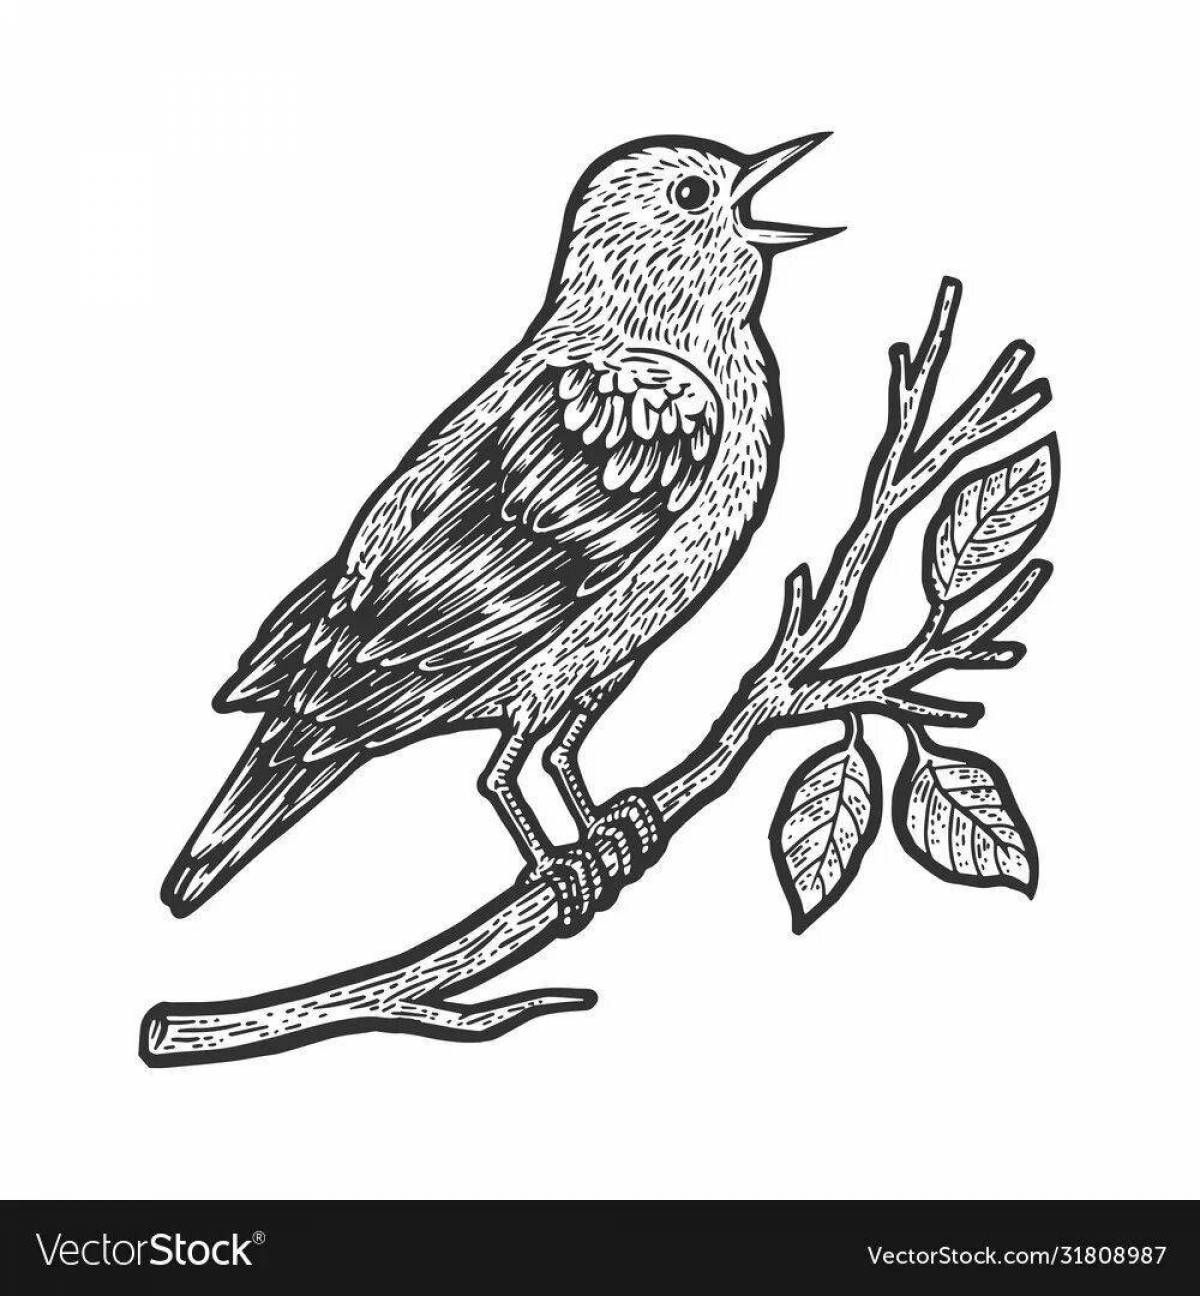 Awesome nightingale coloring page